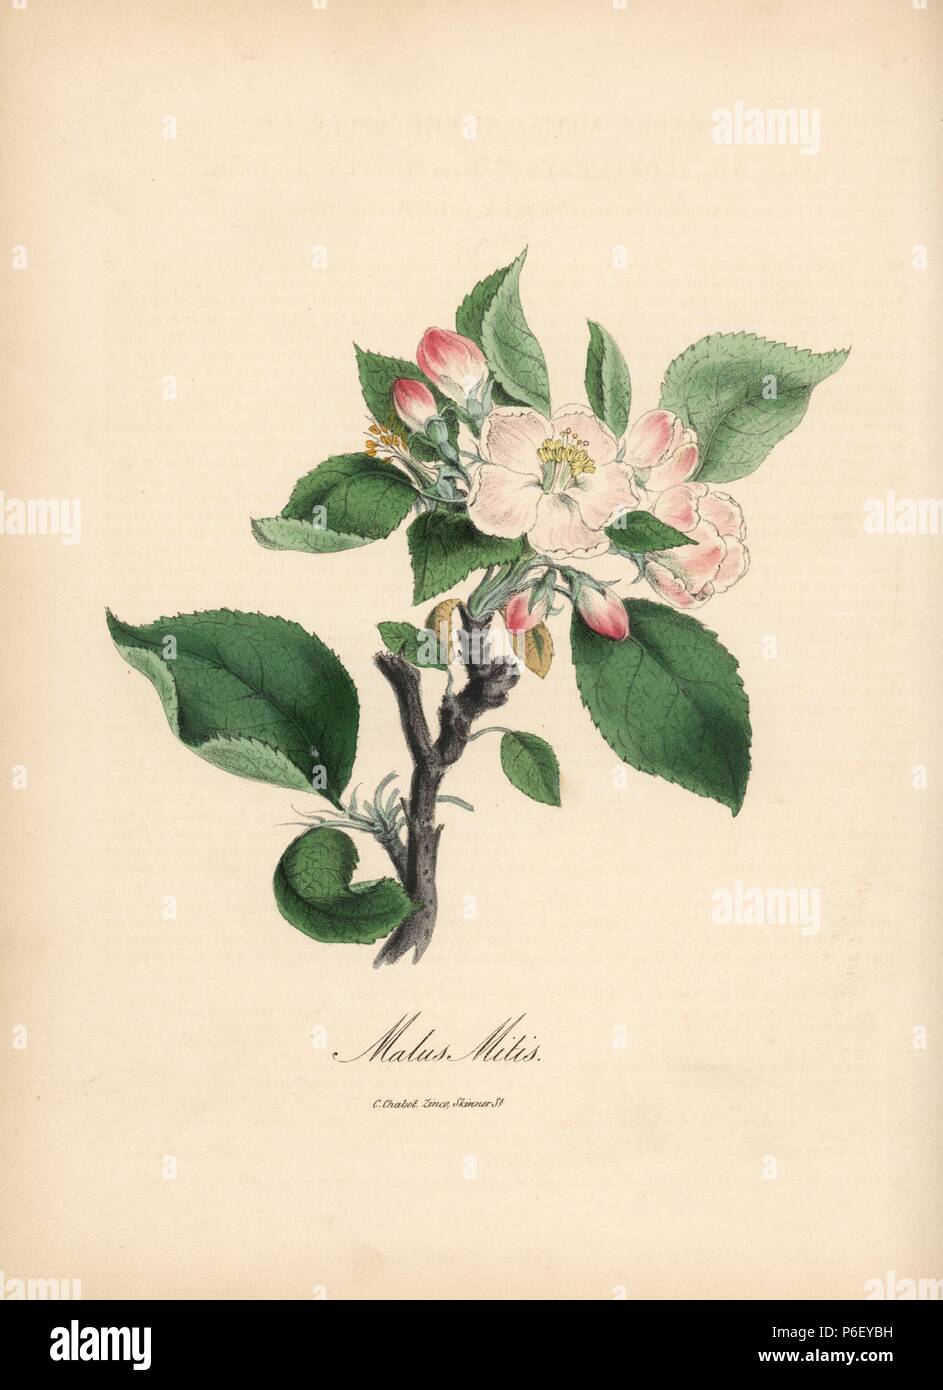 Sweet apple, Malus domestica. Handcoloured zincograph by Chabots drawn by Miss M. A. Burnett from her 'Plantae Utiliores: or Illustrations of Useful Plants,' Whittaker, London, 1842. Miss Burnett drew the botanical illustrations, but the text was chiefly by her late brother, British botanist Gilbert Thomas Burnett (1800-1835). Stock Photo